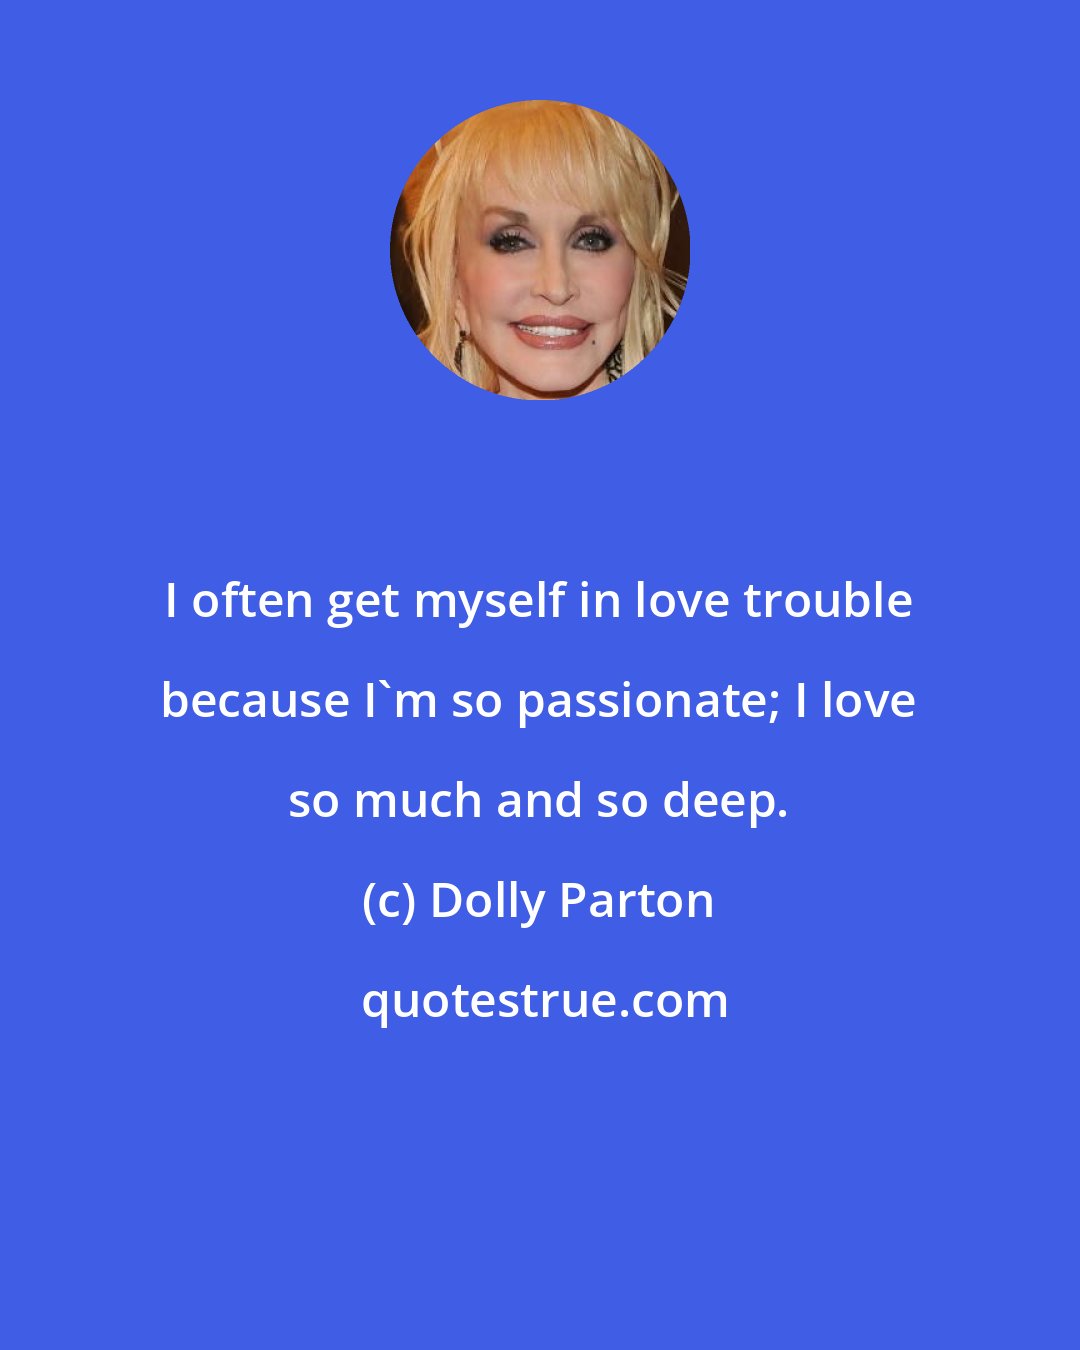 Dolly Parton: I often get myself in love trouble because I'm so passionate; I love so much and so deep.